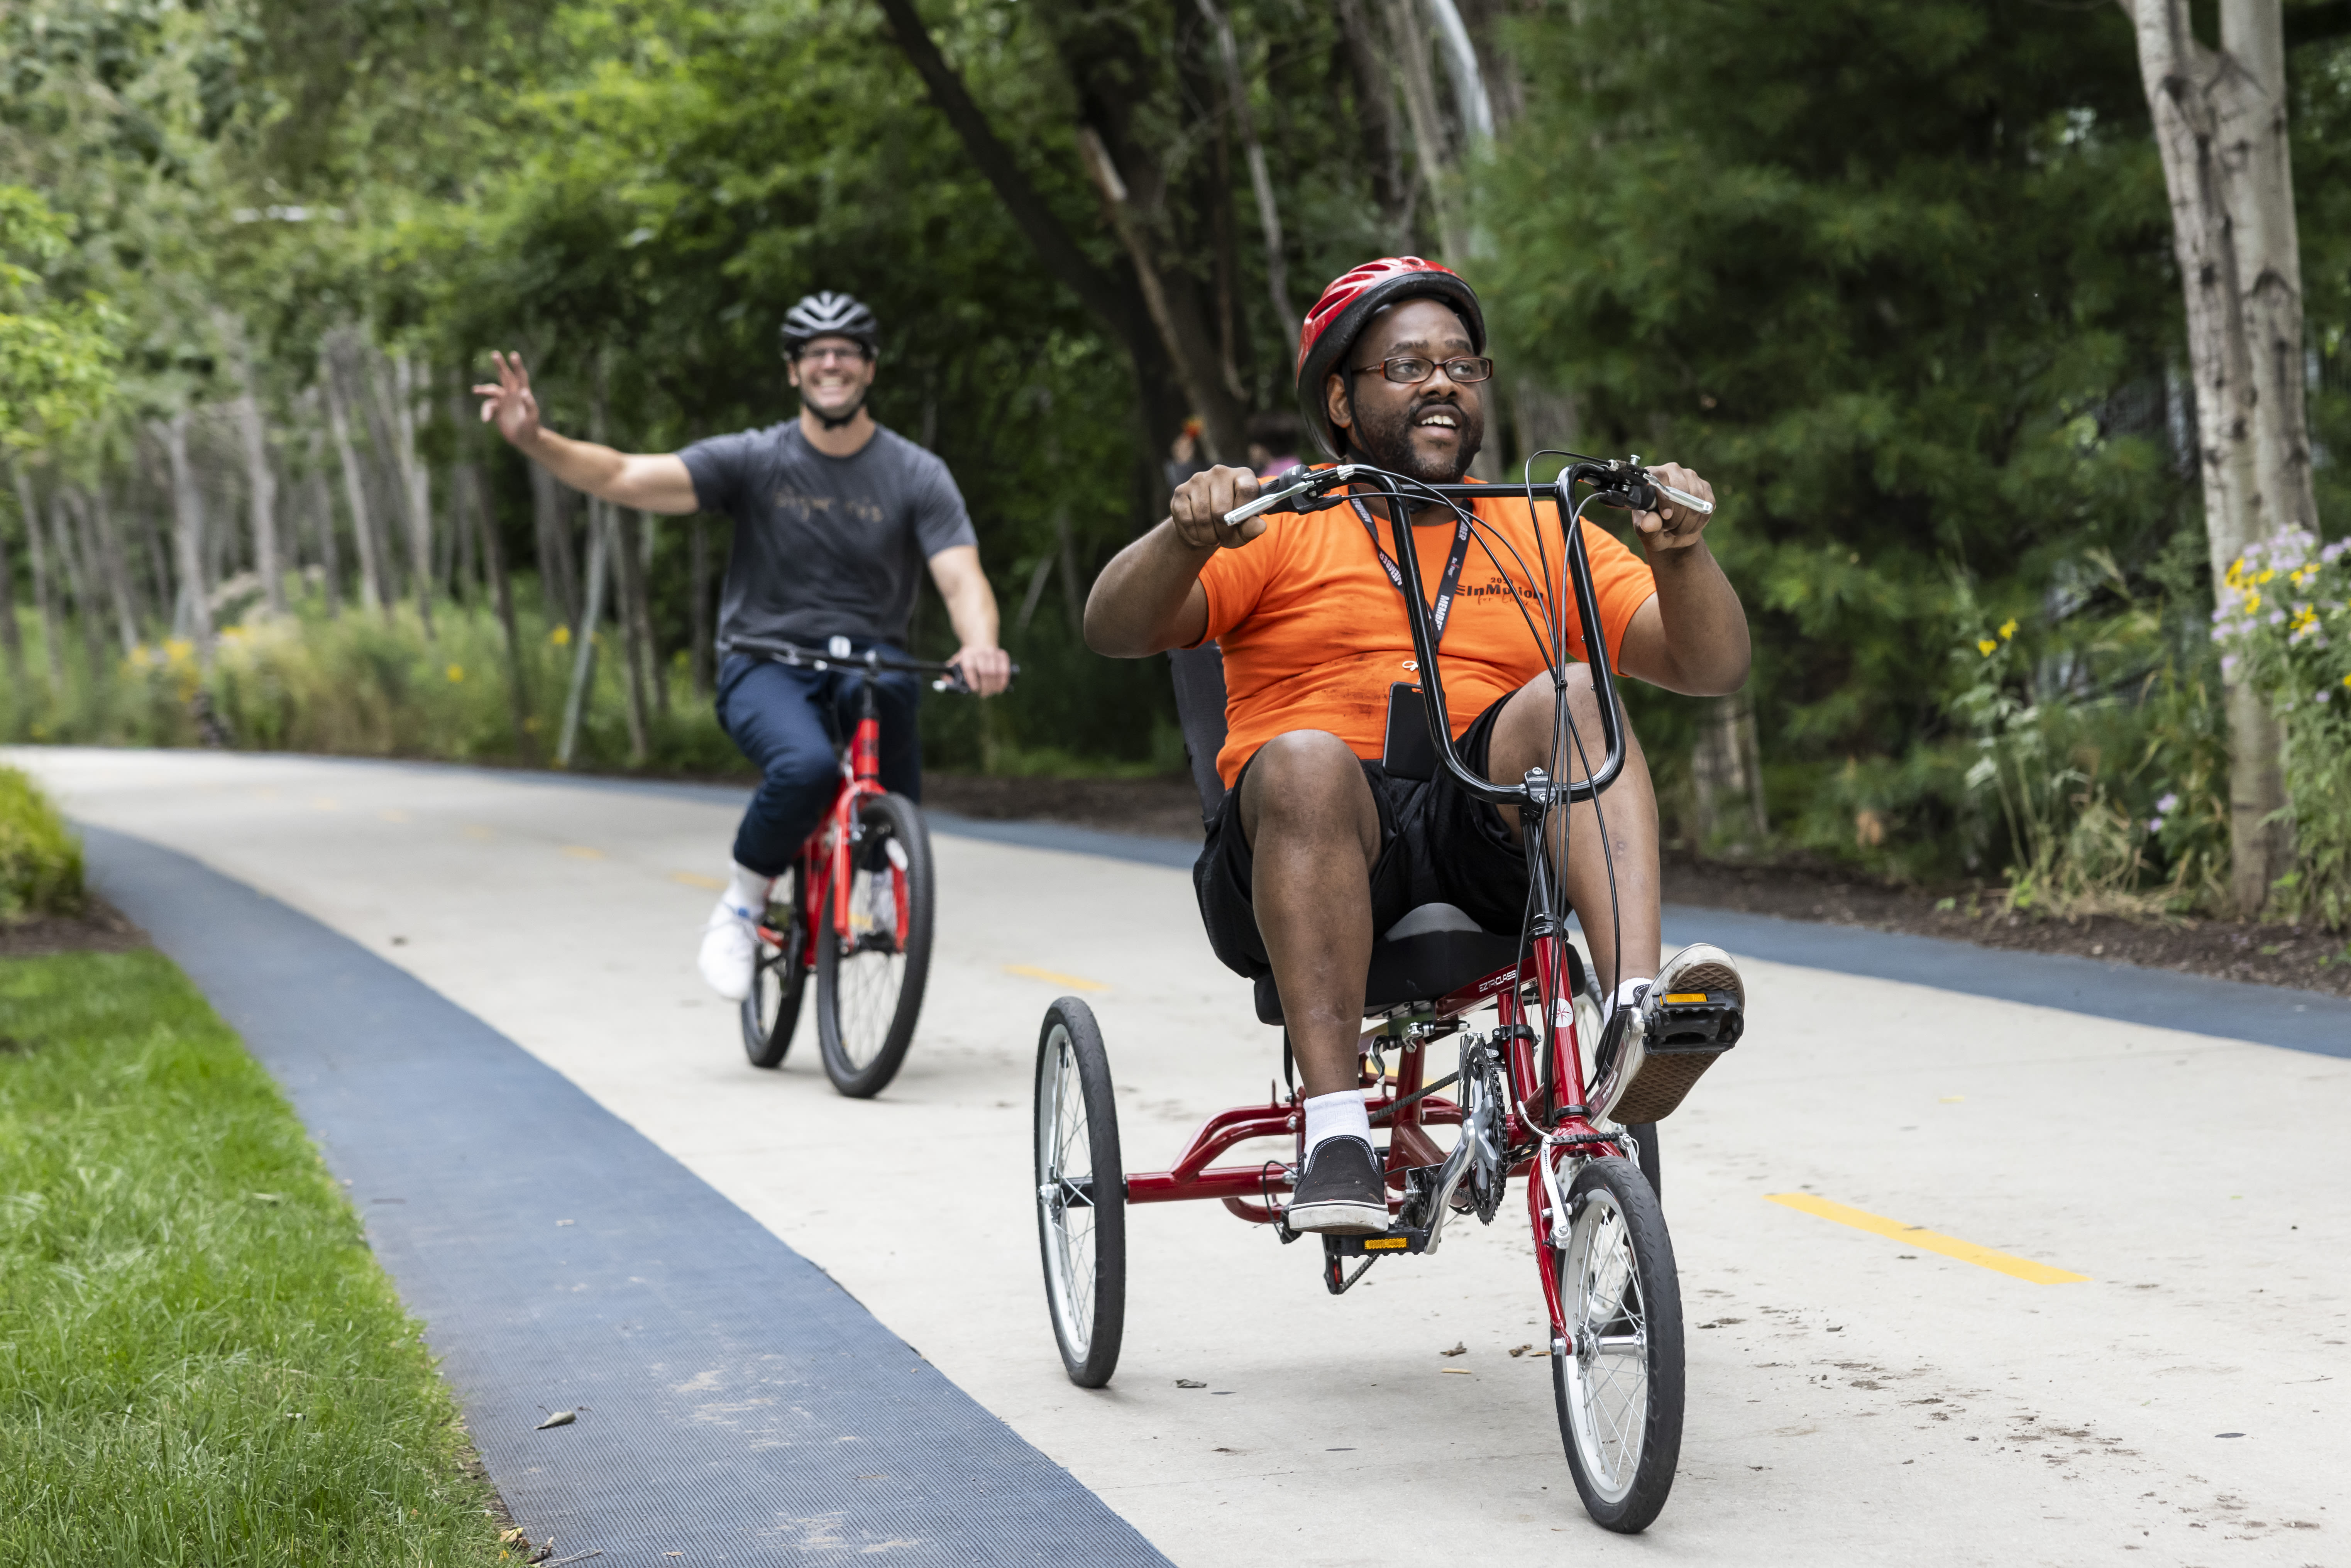 Bike ride from Skokie to Logan Square shows people of all abilities can ride